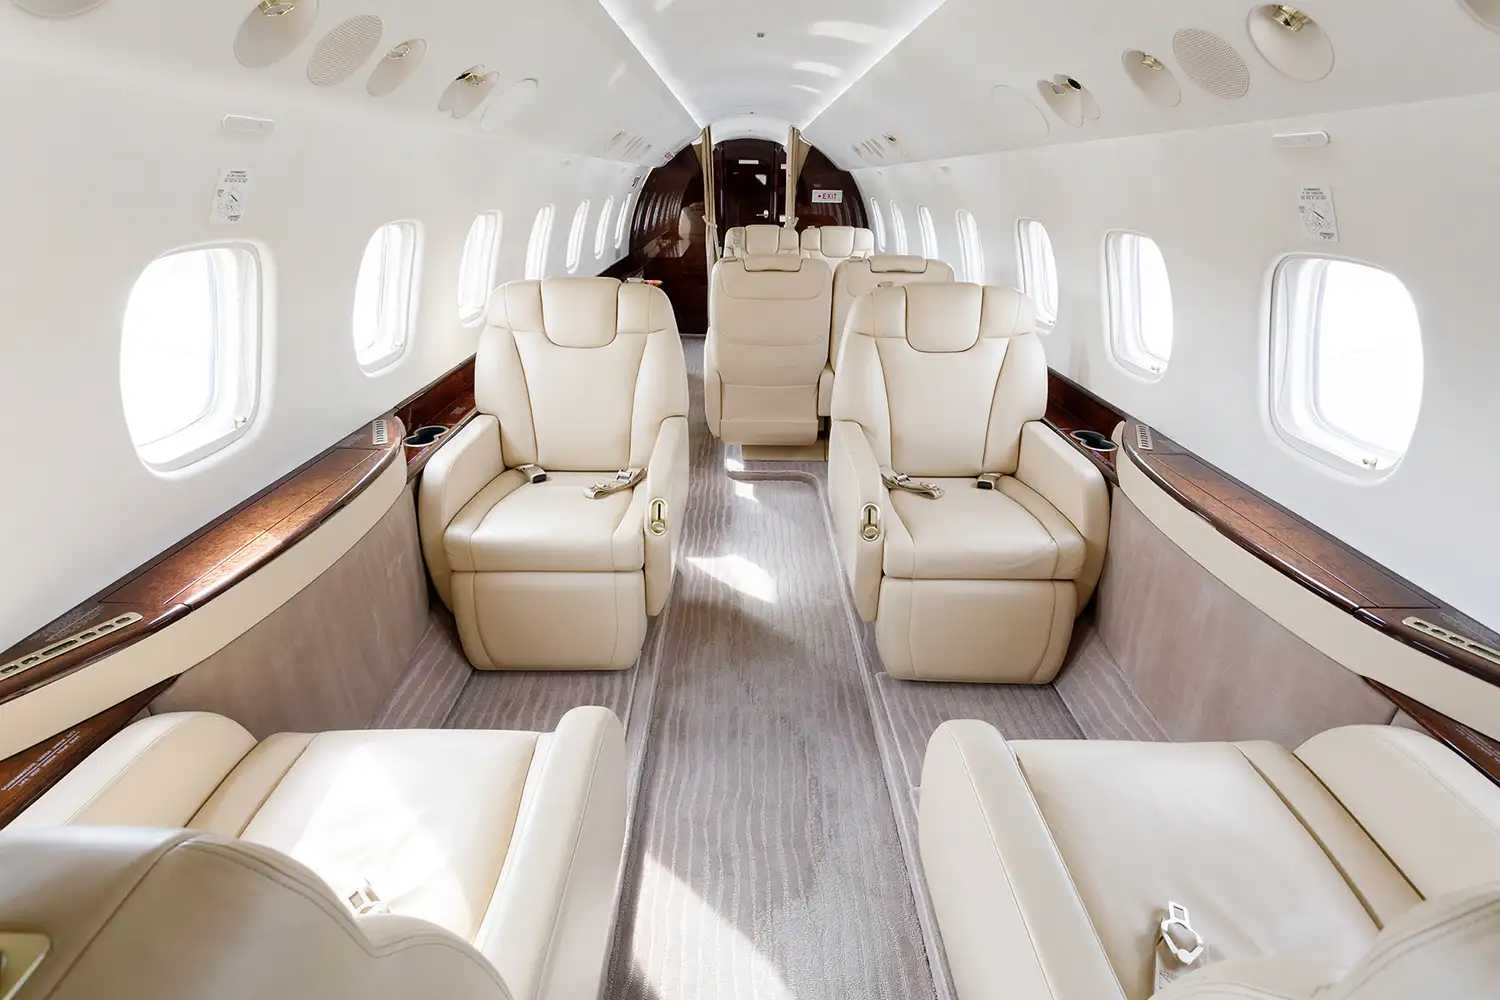 Interior of a luxurious business jet, ideal for empty leg flights, featuring spacious beige leather seats aligned along both sides of the cabin, with ample natural light from the oval windows and a polished wood trim for an elegant finish.